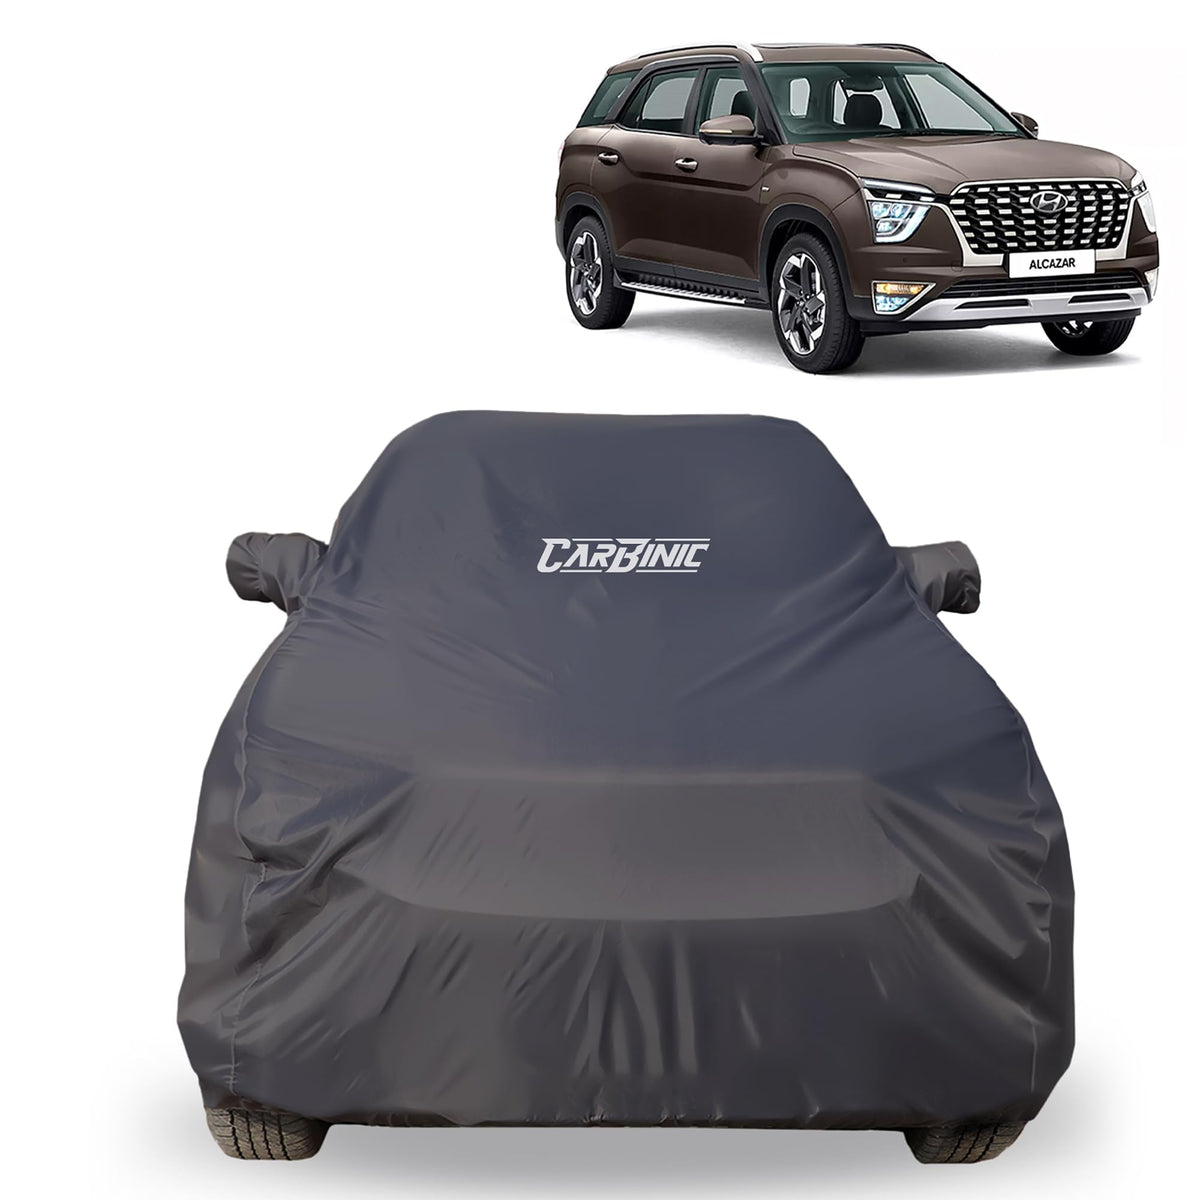 CARBINIC Car Body Cover for Mahindra Scorpio N 2022 | Water Resistant, UV Protection Car Cover | Scratchproof Body Shield | All-Weather Cover | Mirror Pocket & Antenna | Car Accessories Dusk Grey